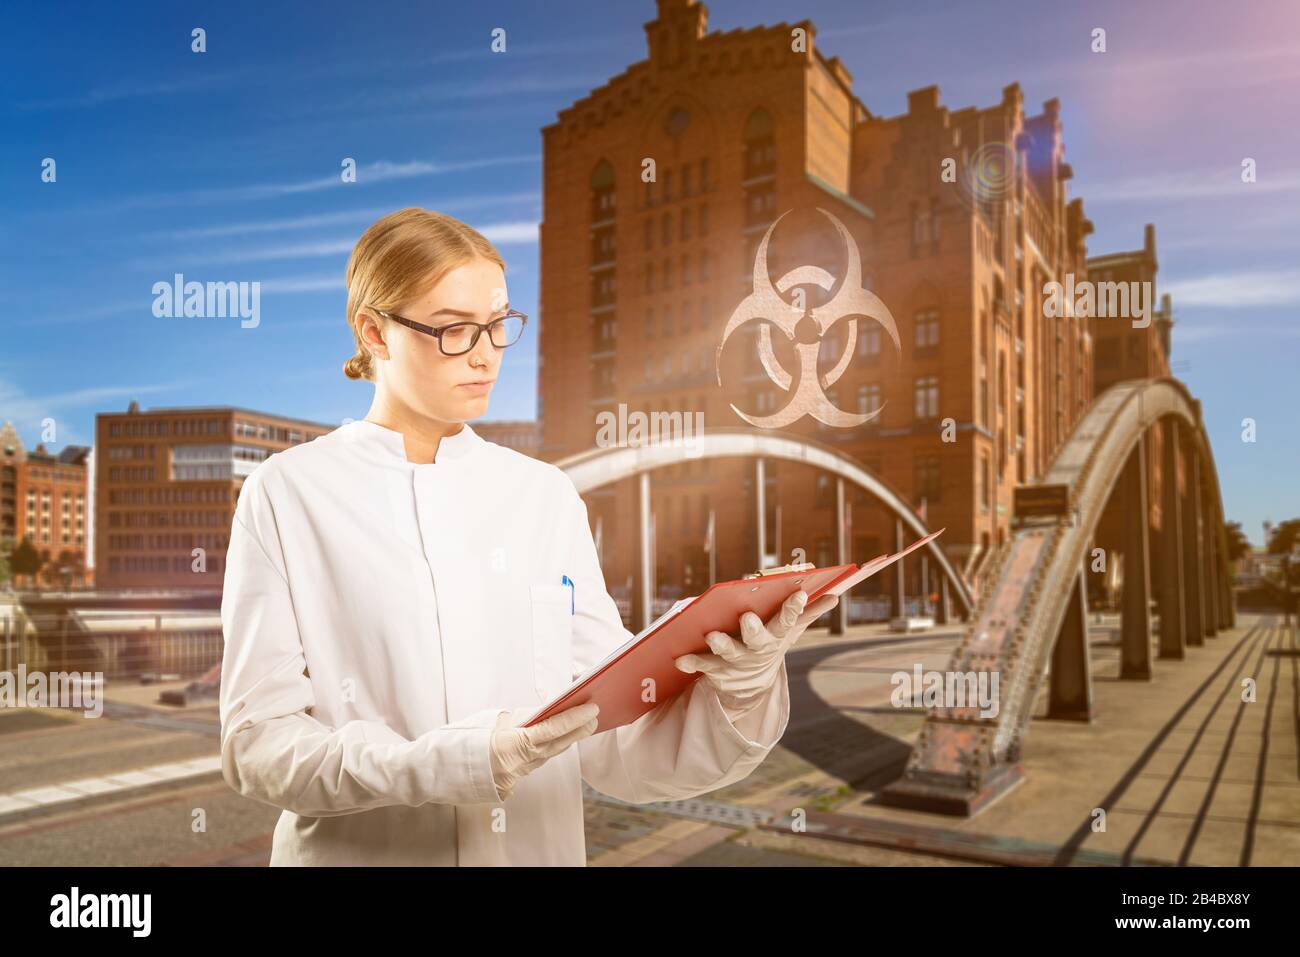 concept image about the biological hazard of viruses in a town Stock Photo